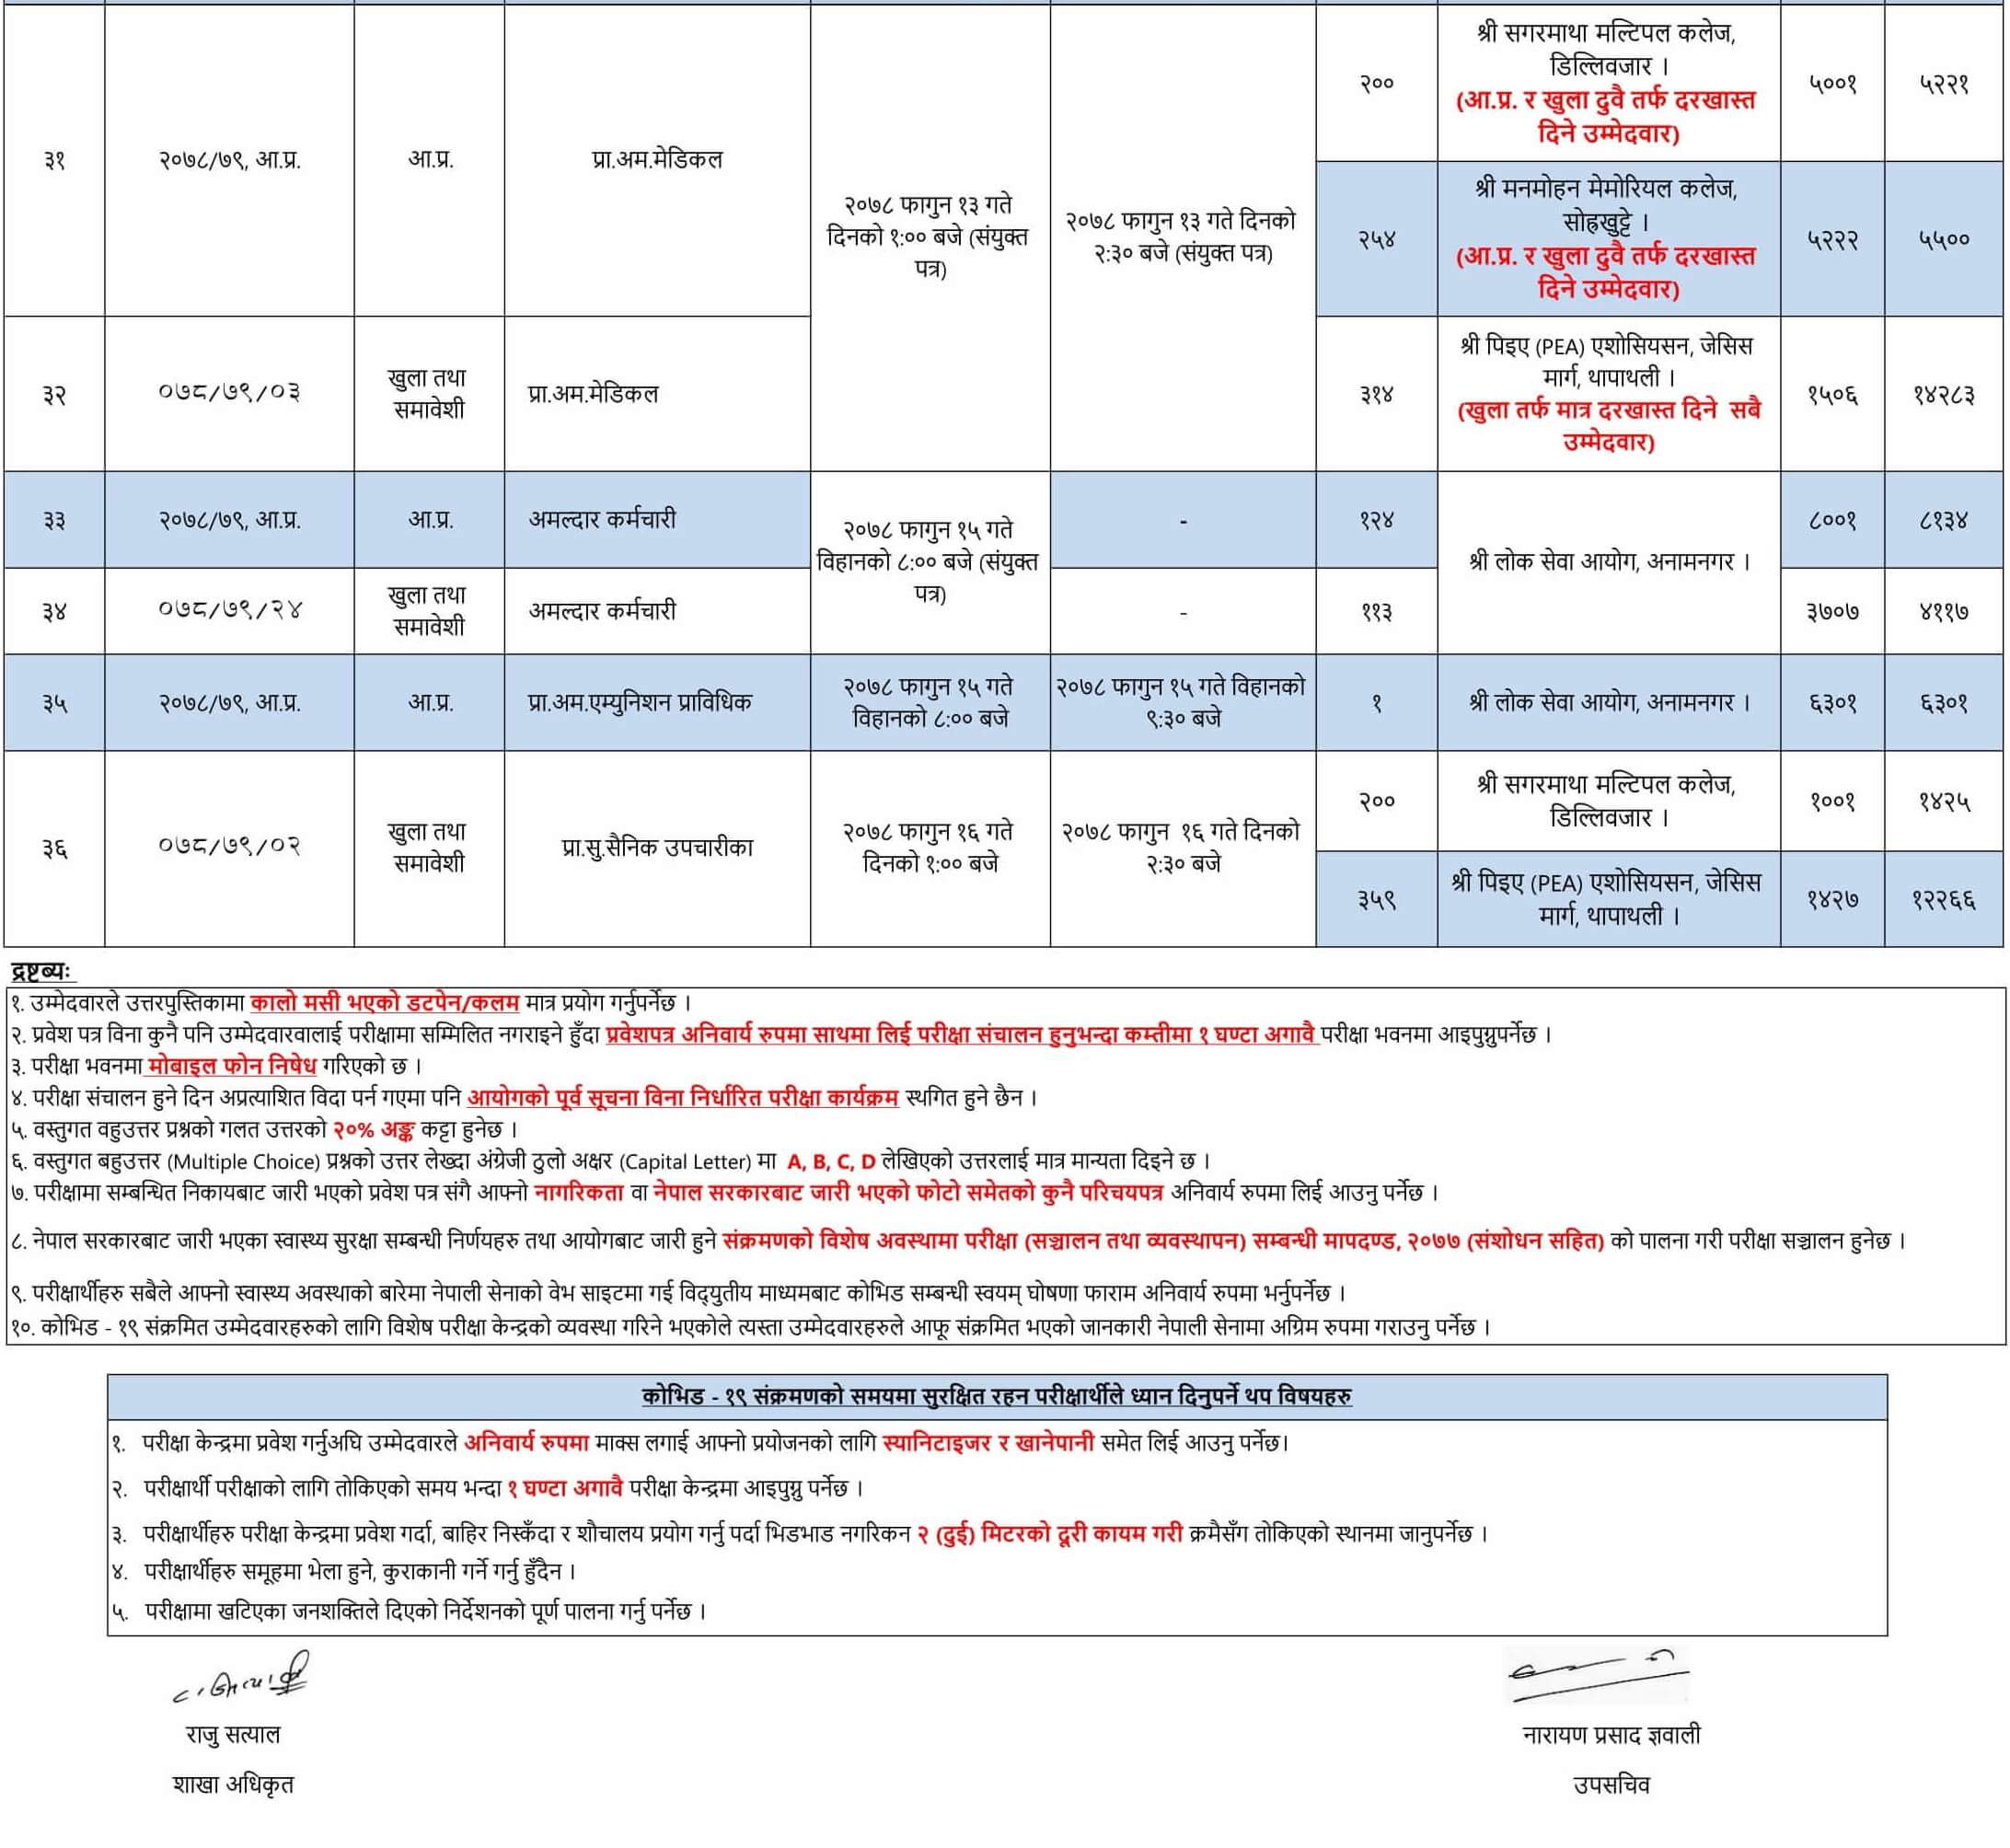 Nepal Army Revised Exam Schedule of Various Post